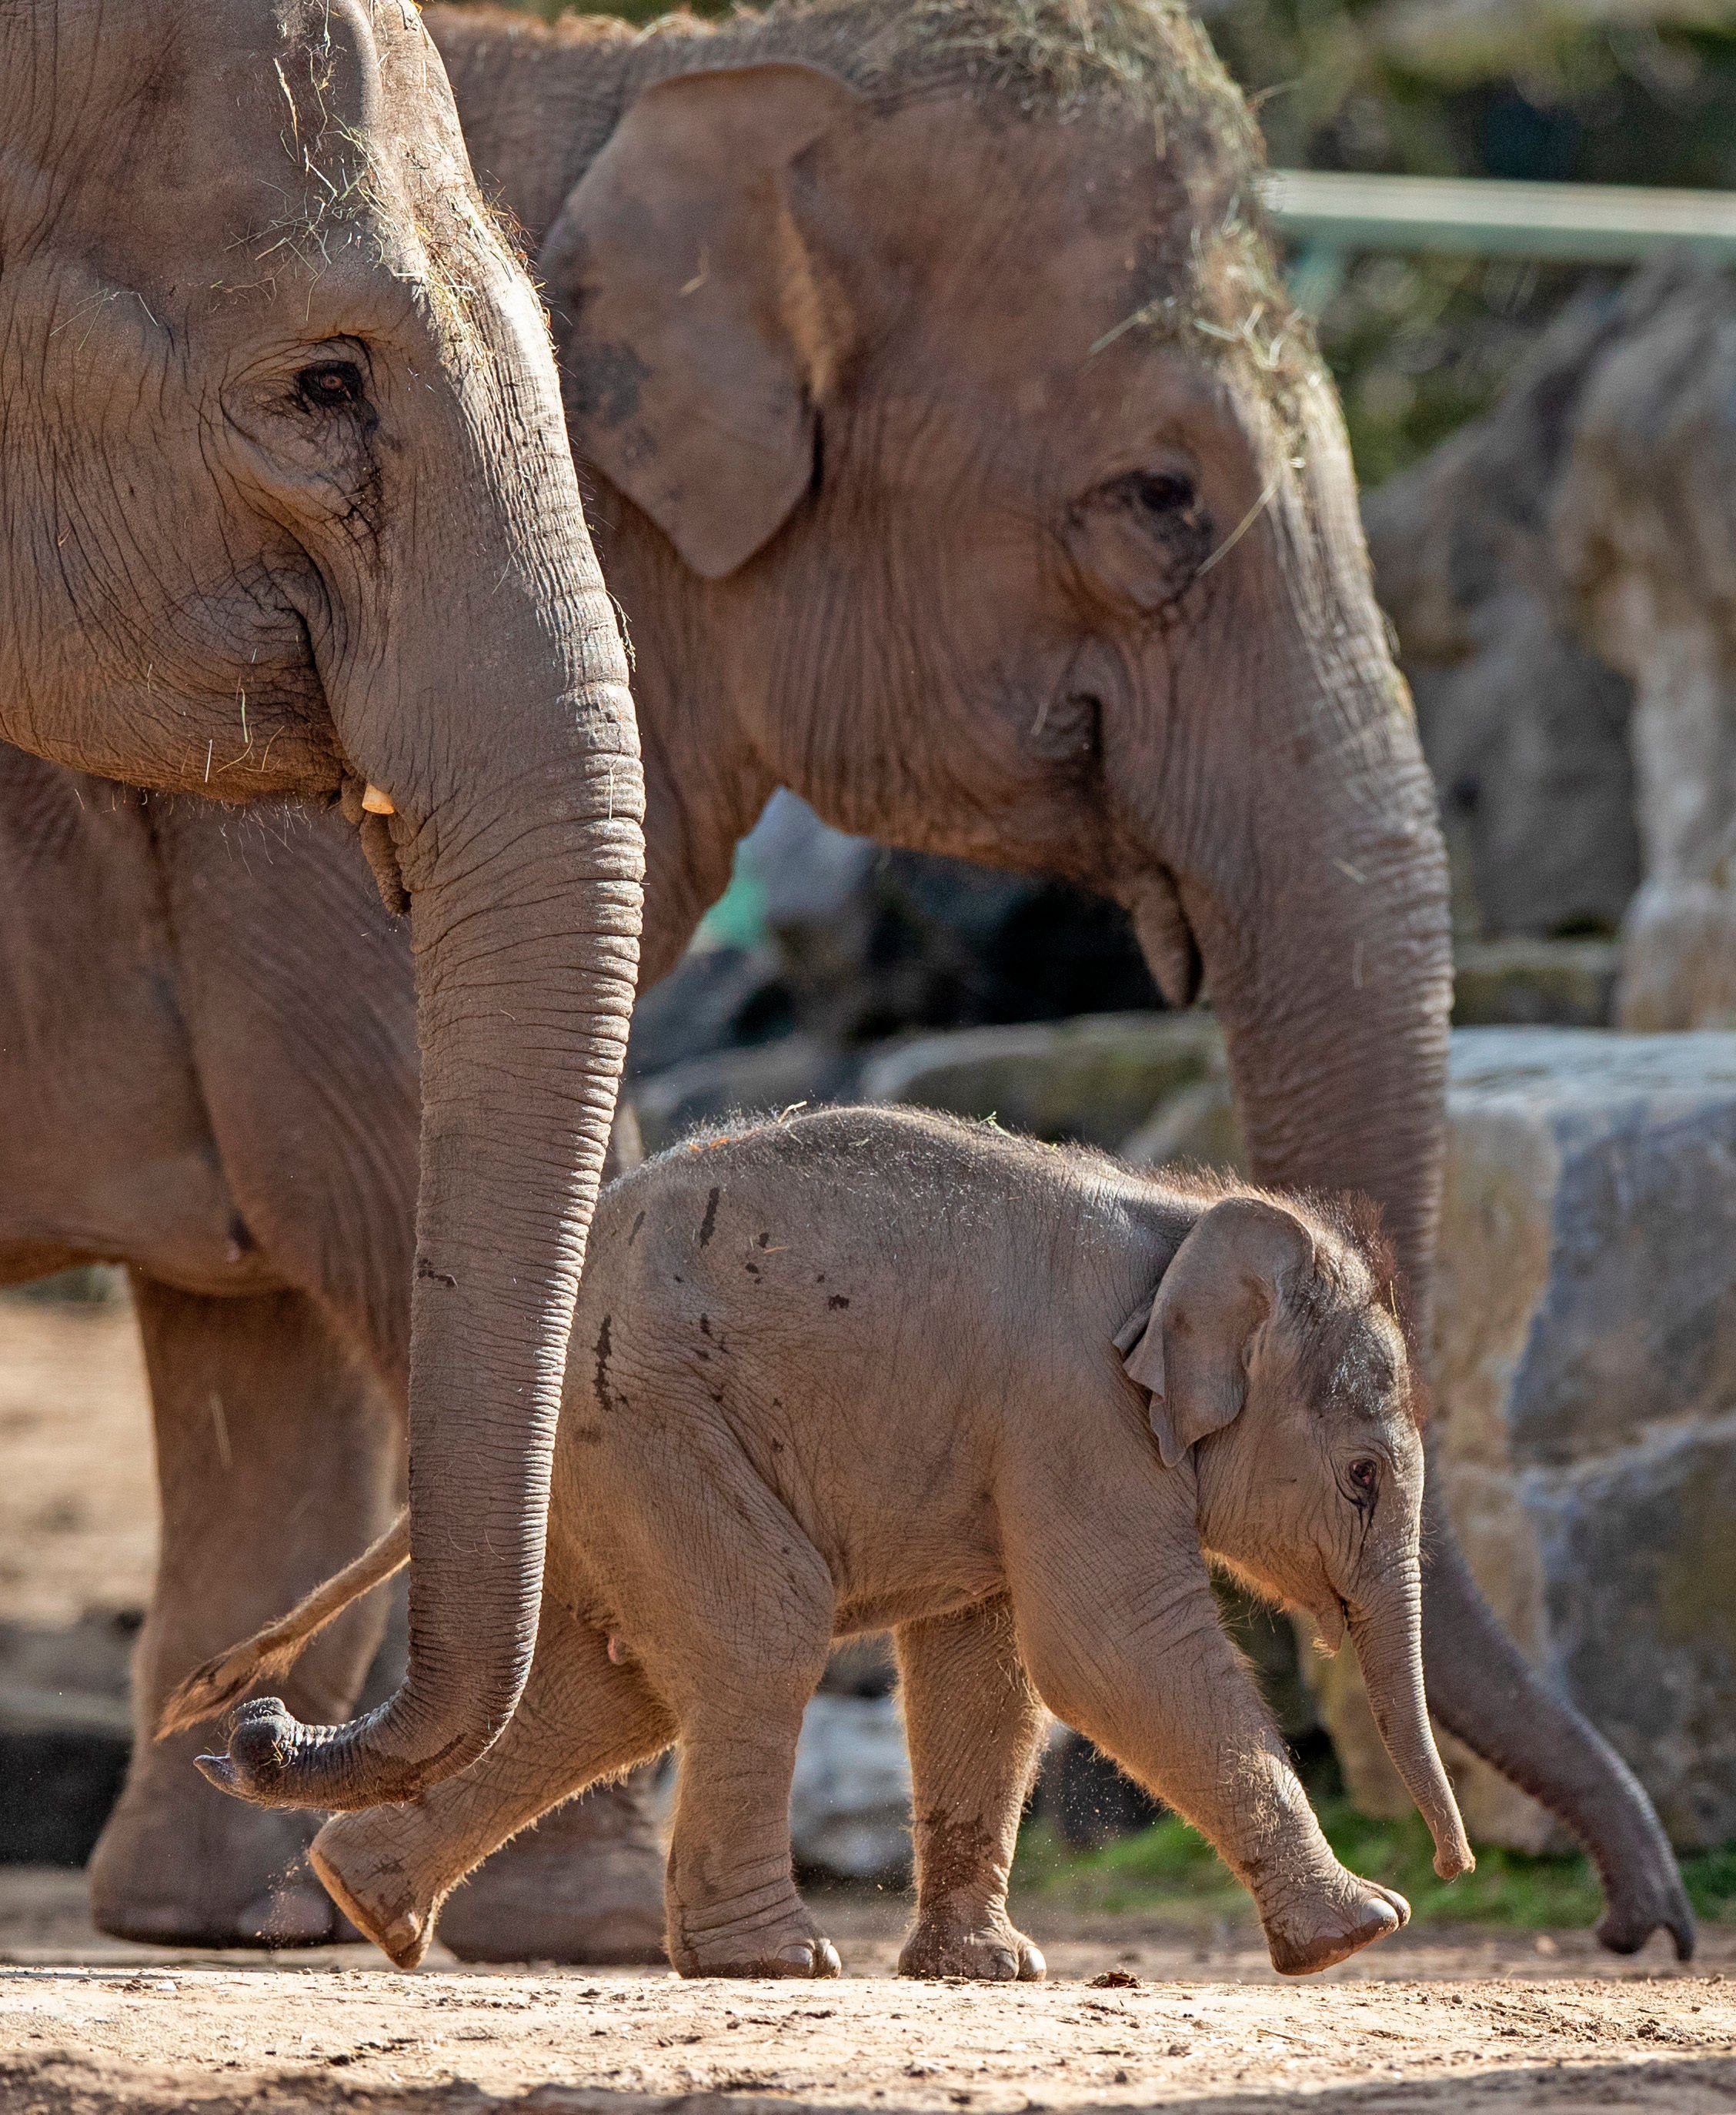 Riva Hi Way, a baby Asian elephant calf born last month at Chester Zoo, makes her public debut alongside her mother 15-year-old Sundara Hi Way (left). PA Photo. Picture date: Friday March 20, 2020. The calf was born after a 22 month pregnancy. Asian elephants are listed as endangered by the International Union for the Conservation of Nature (IUCN) and the species is highly threatened in the wild by habitat loss, poaching, human-wildlife conflict and a deadly herpes virus called Elephant Endotheliotropic Herpesvirus. Photo credit should read: Peter Byrne/PA Wire. | Foto: von Peter Byrne/PA Images via Getty Images